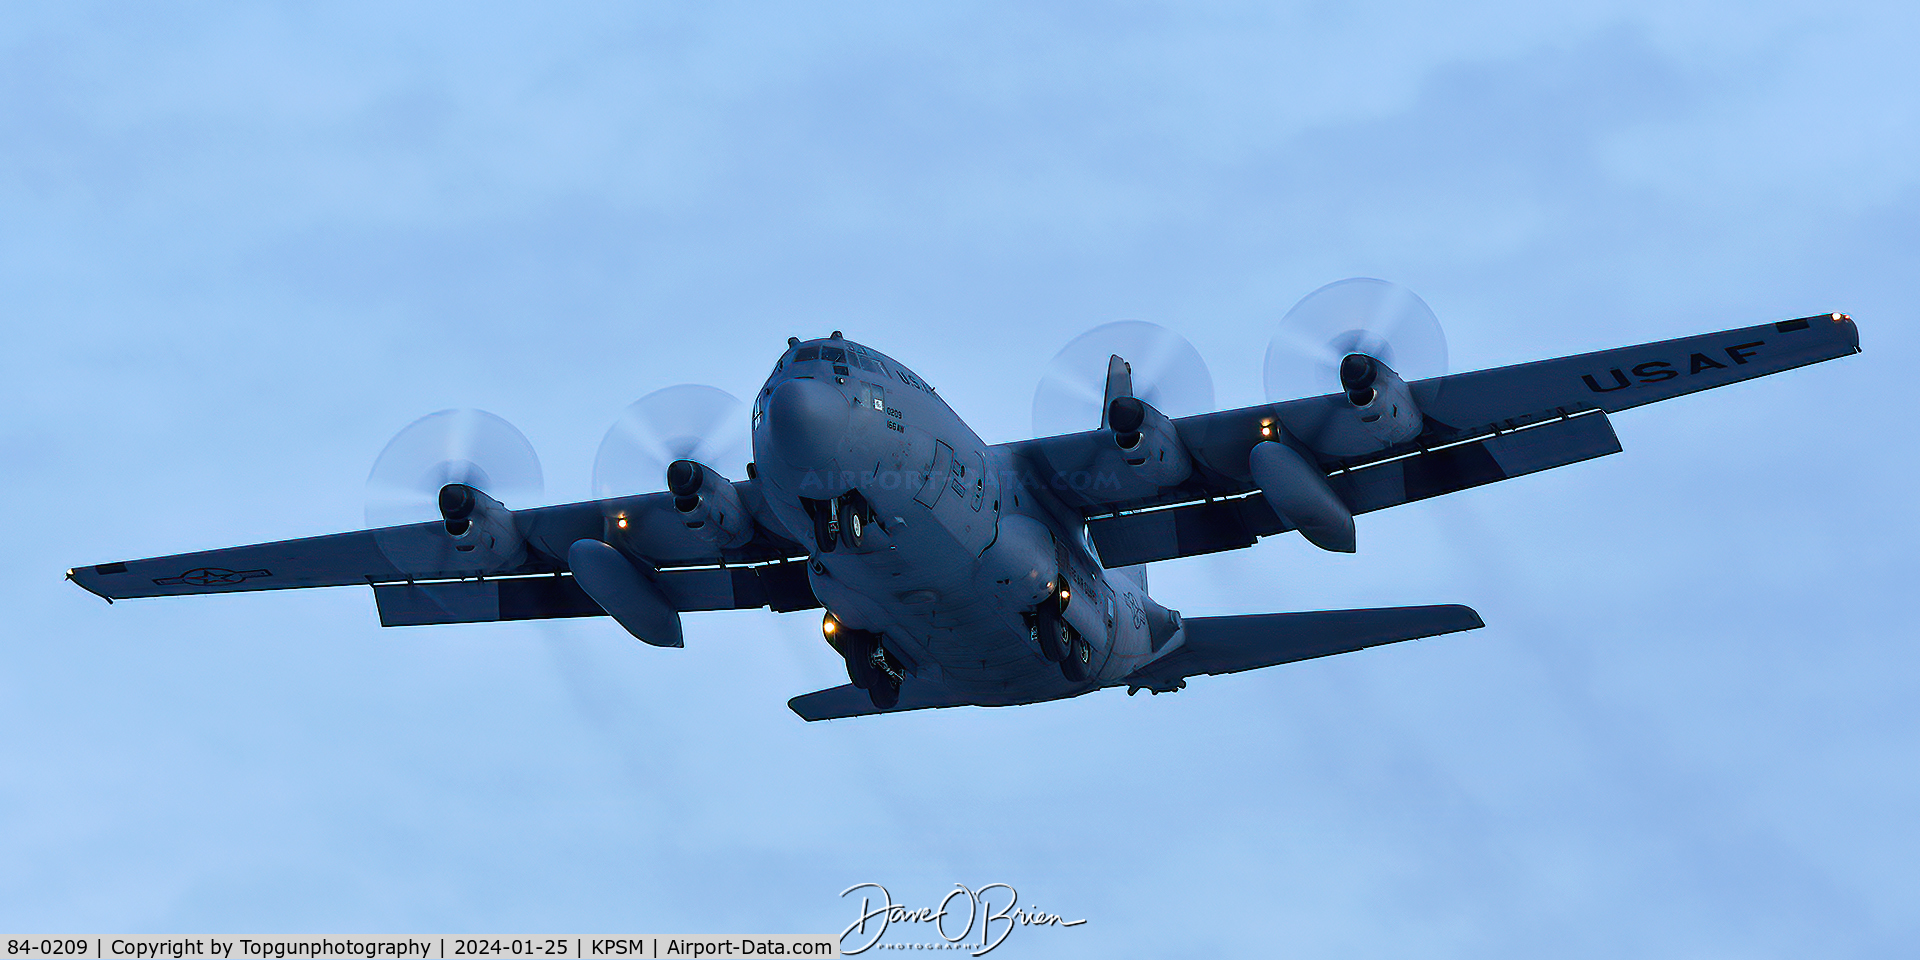 84-0209, 1984 Lockheed C-130H Hercules C/N 382-5047, SKIER09 heading back to home base after this final T&G